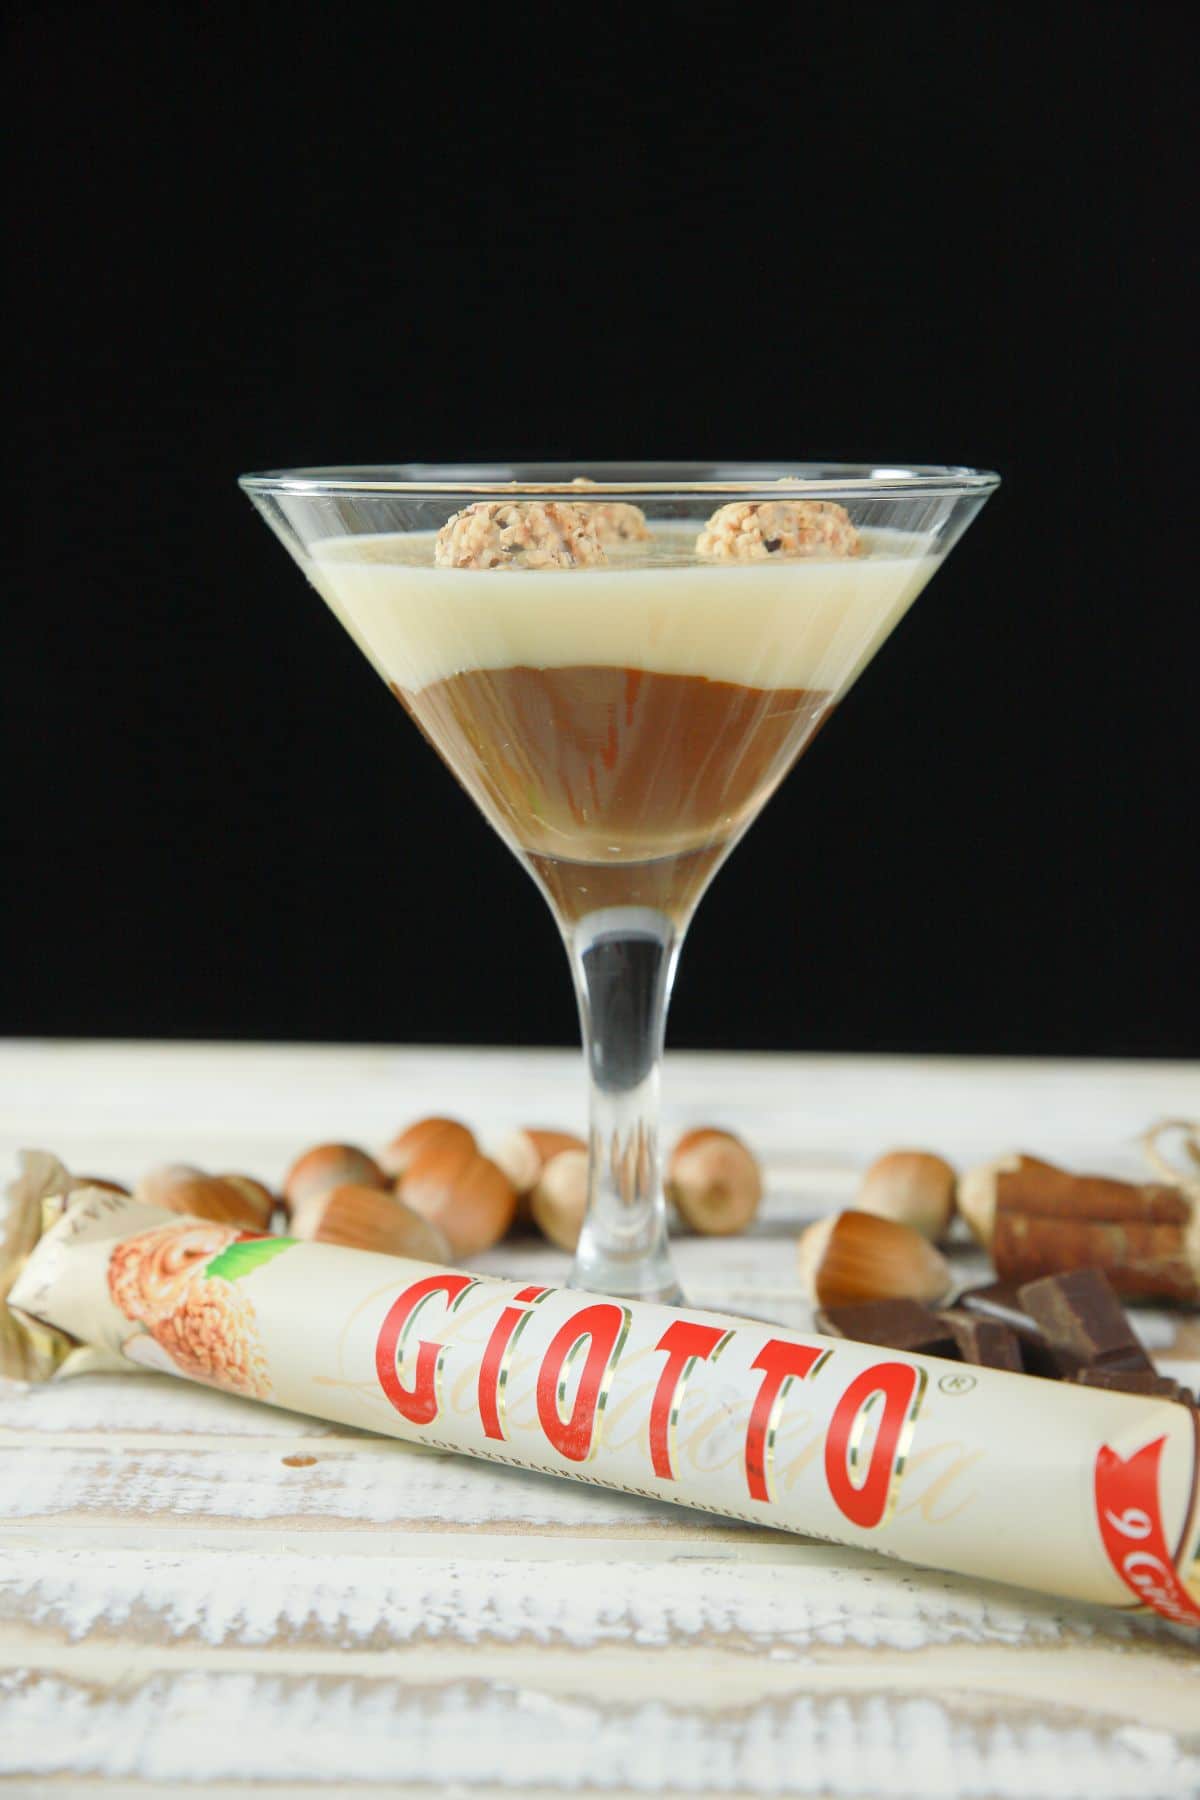 layered kinder joy pudding in martini glass with giotto bar and hazelnuts on white table